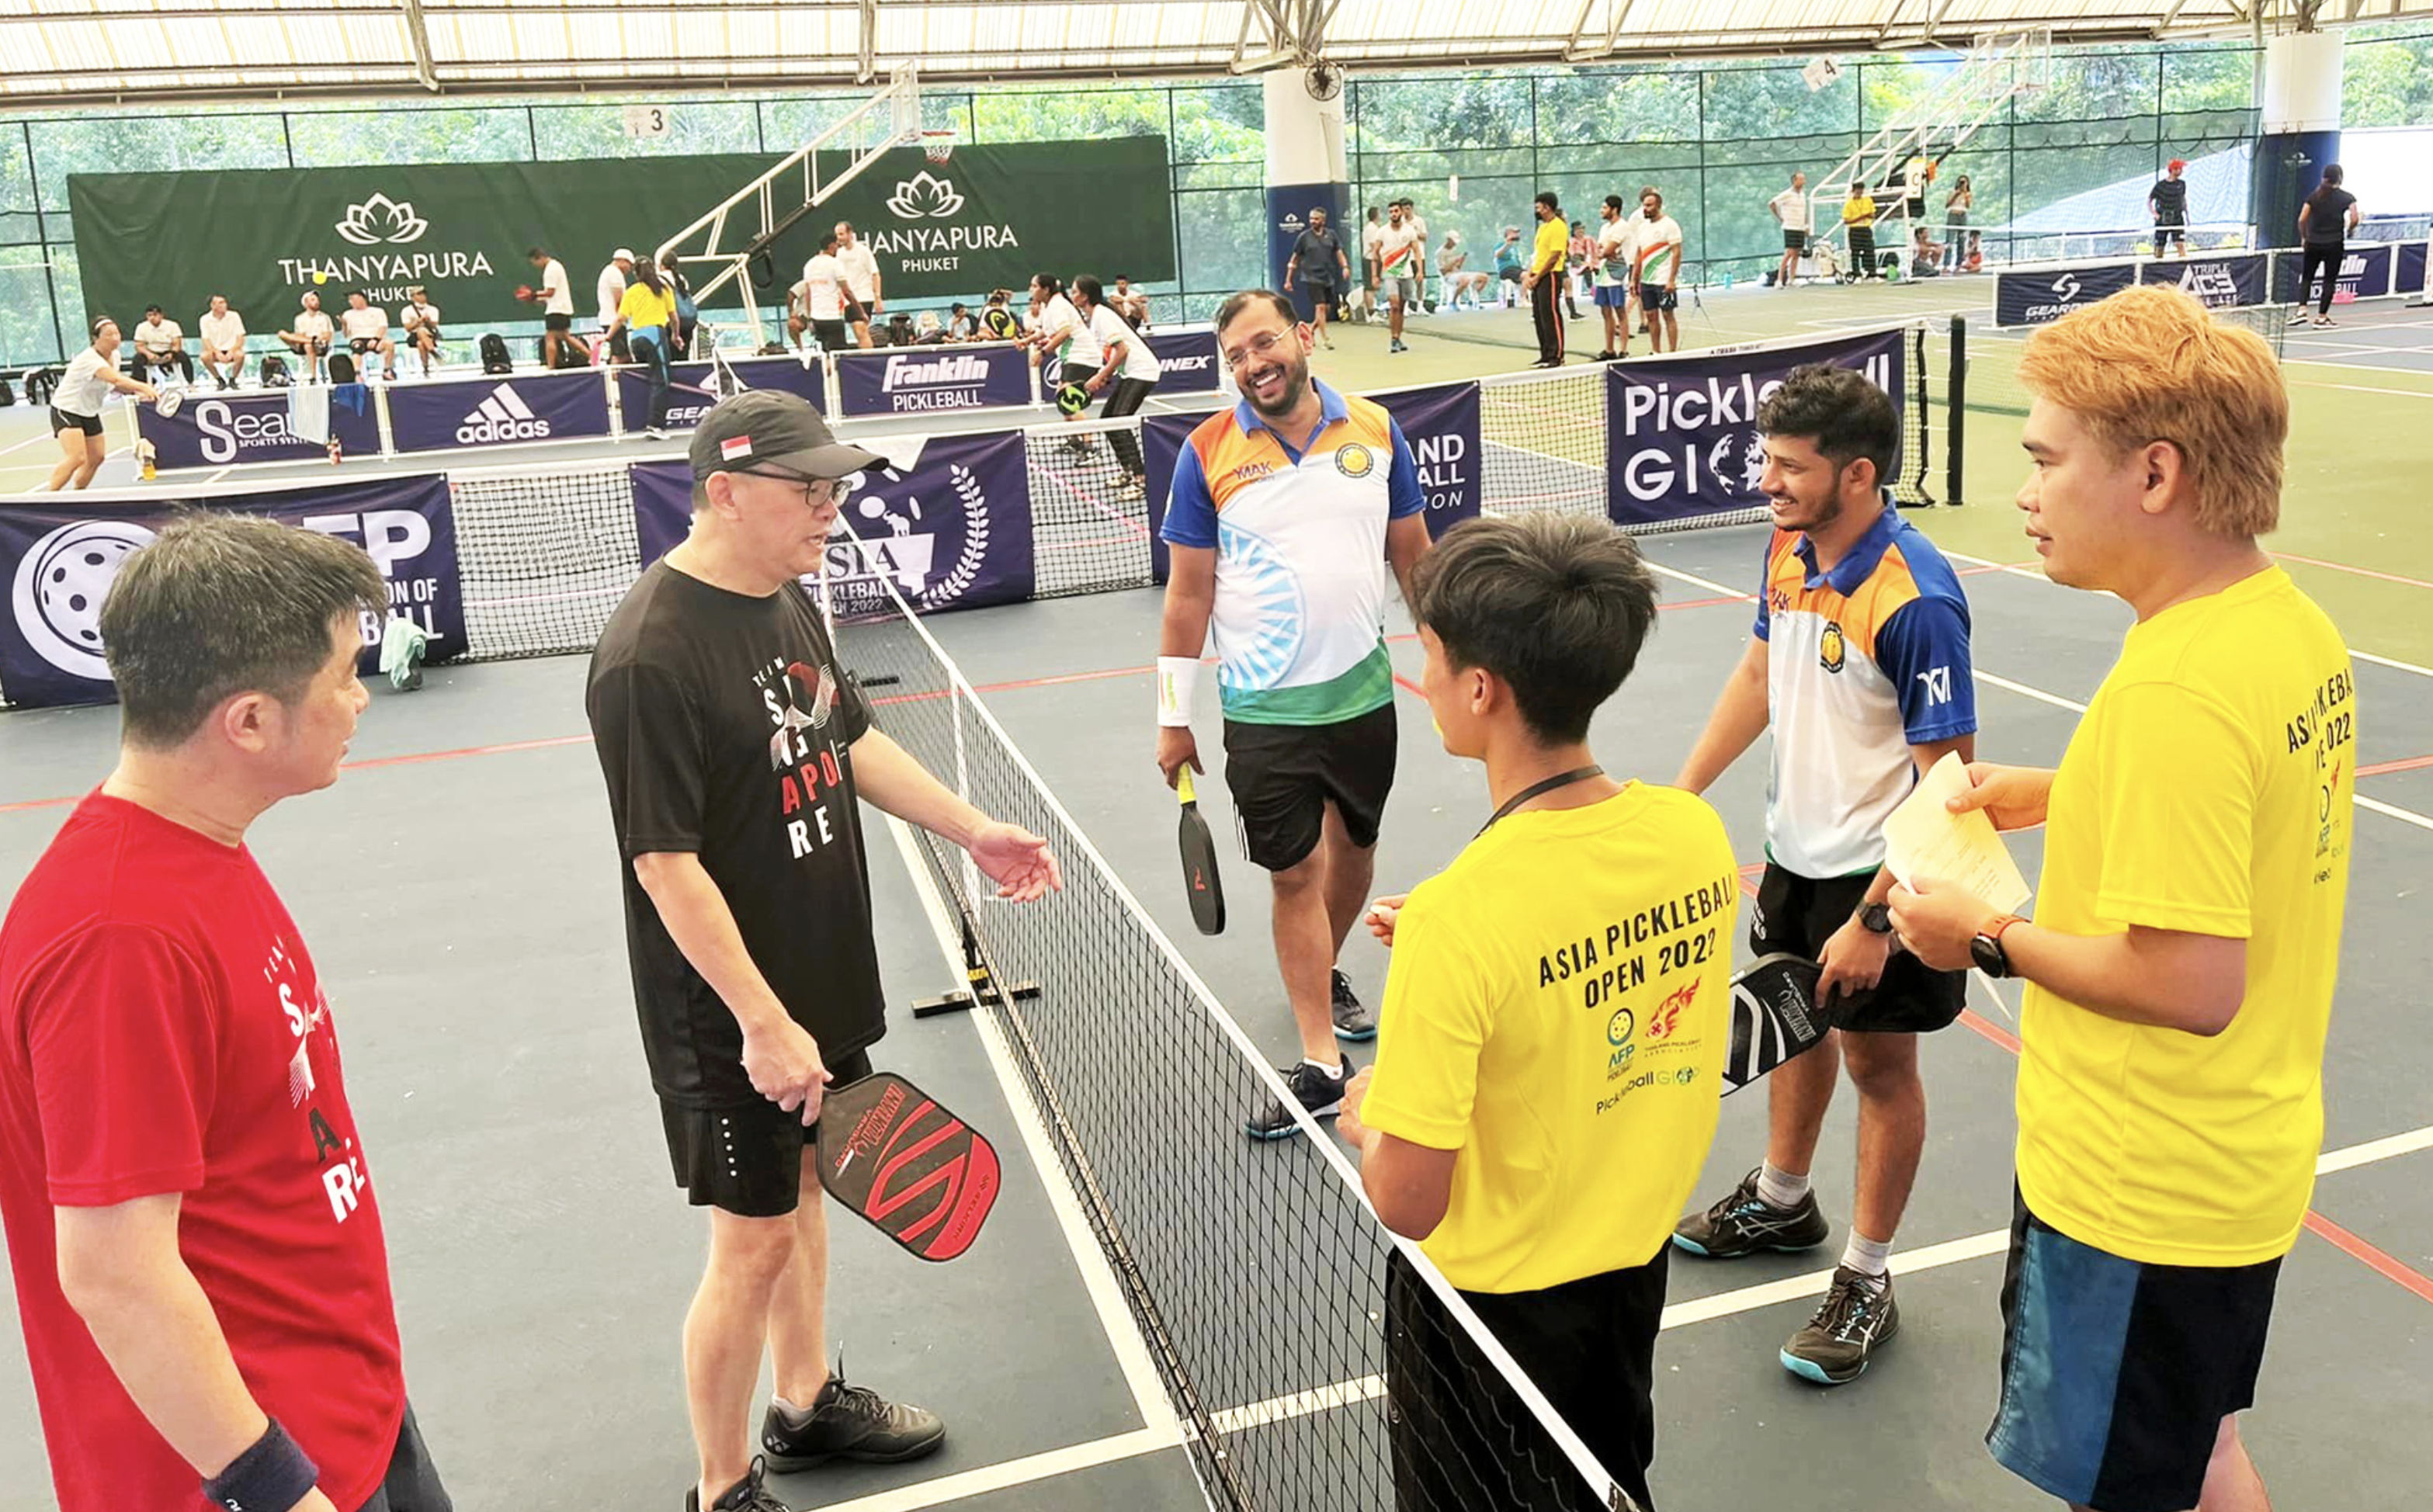 Vietnam to host world pickleball tournament for first time